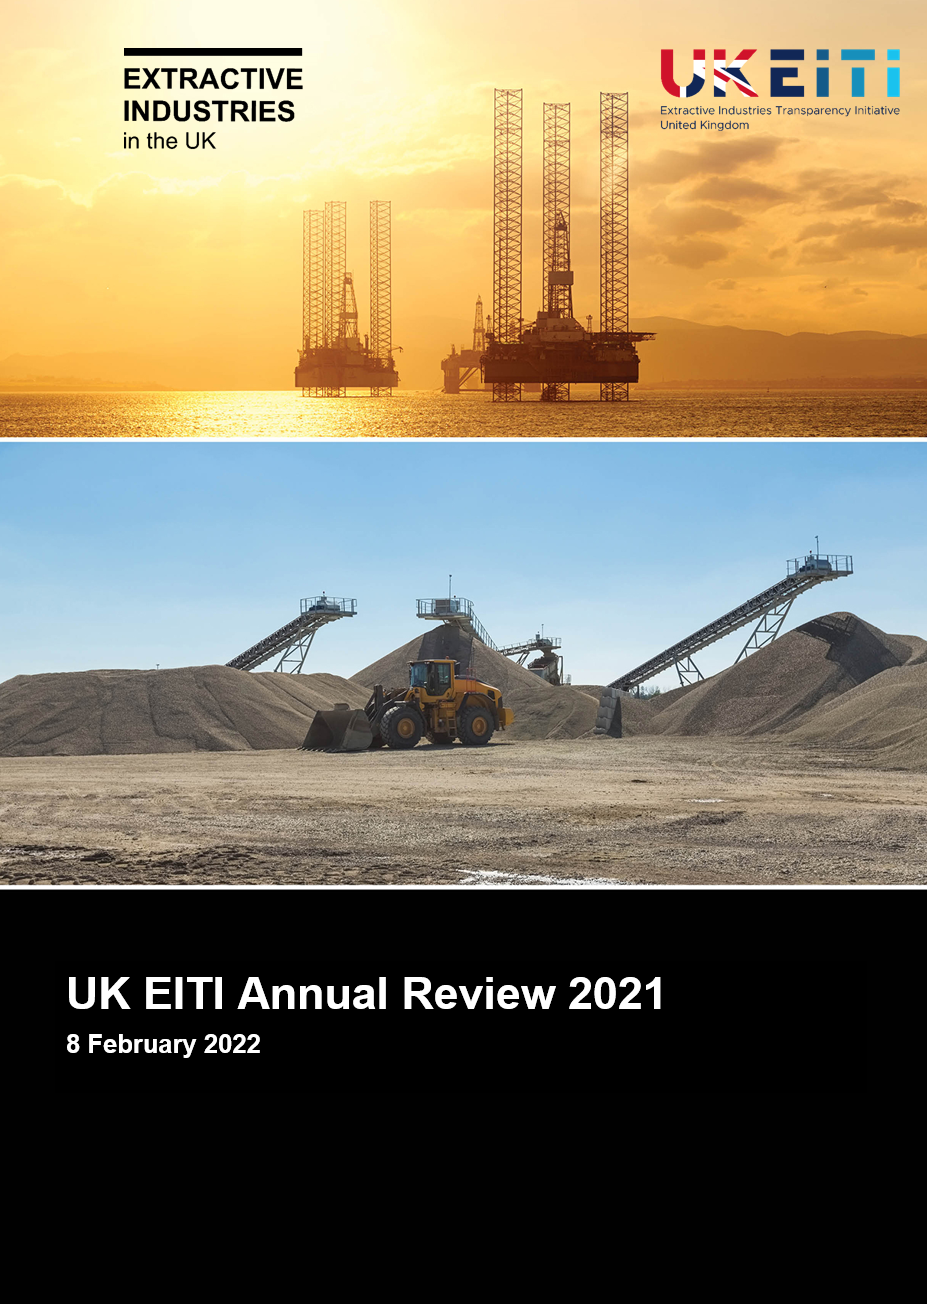 UK EITI Annual Review 2021 cover